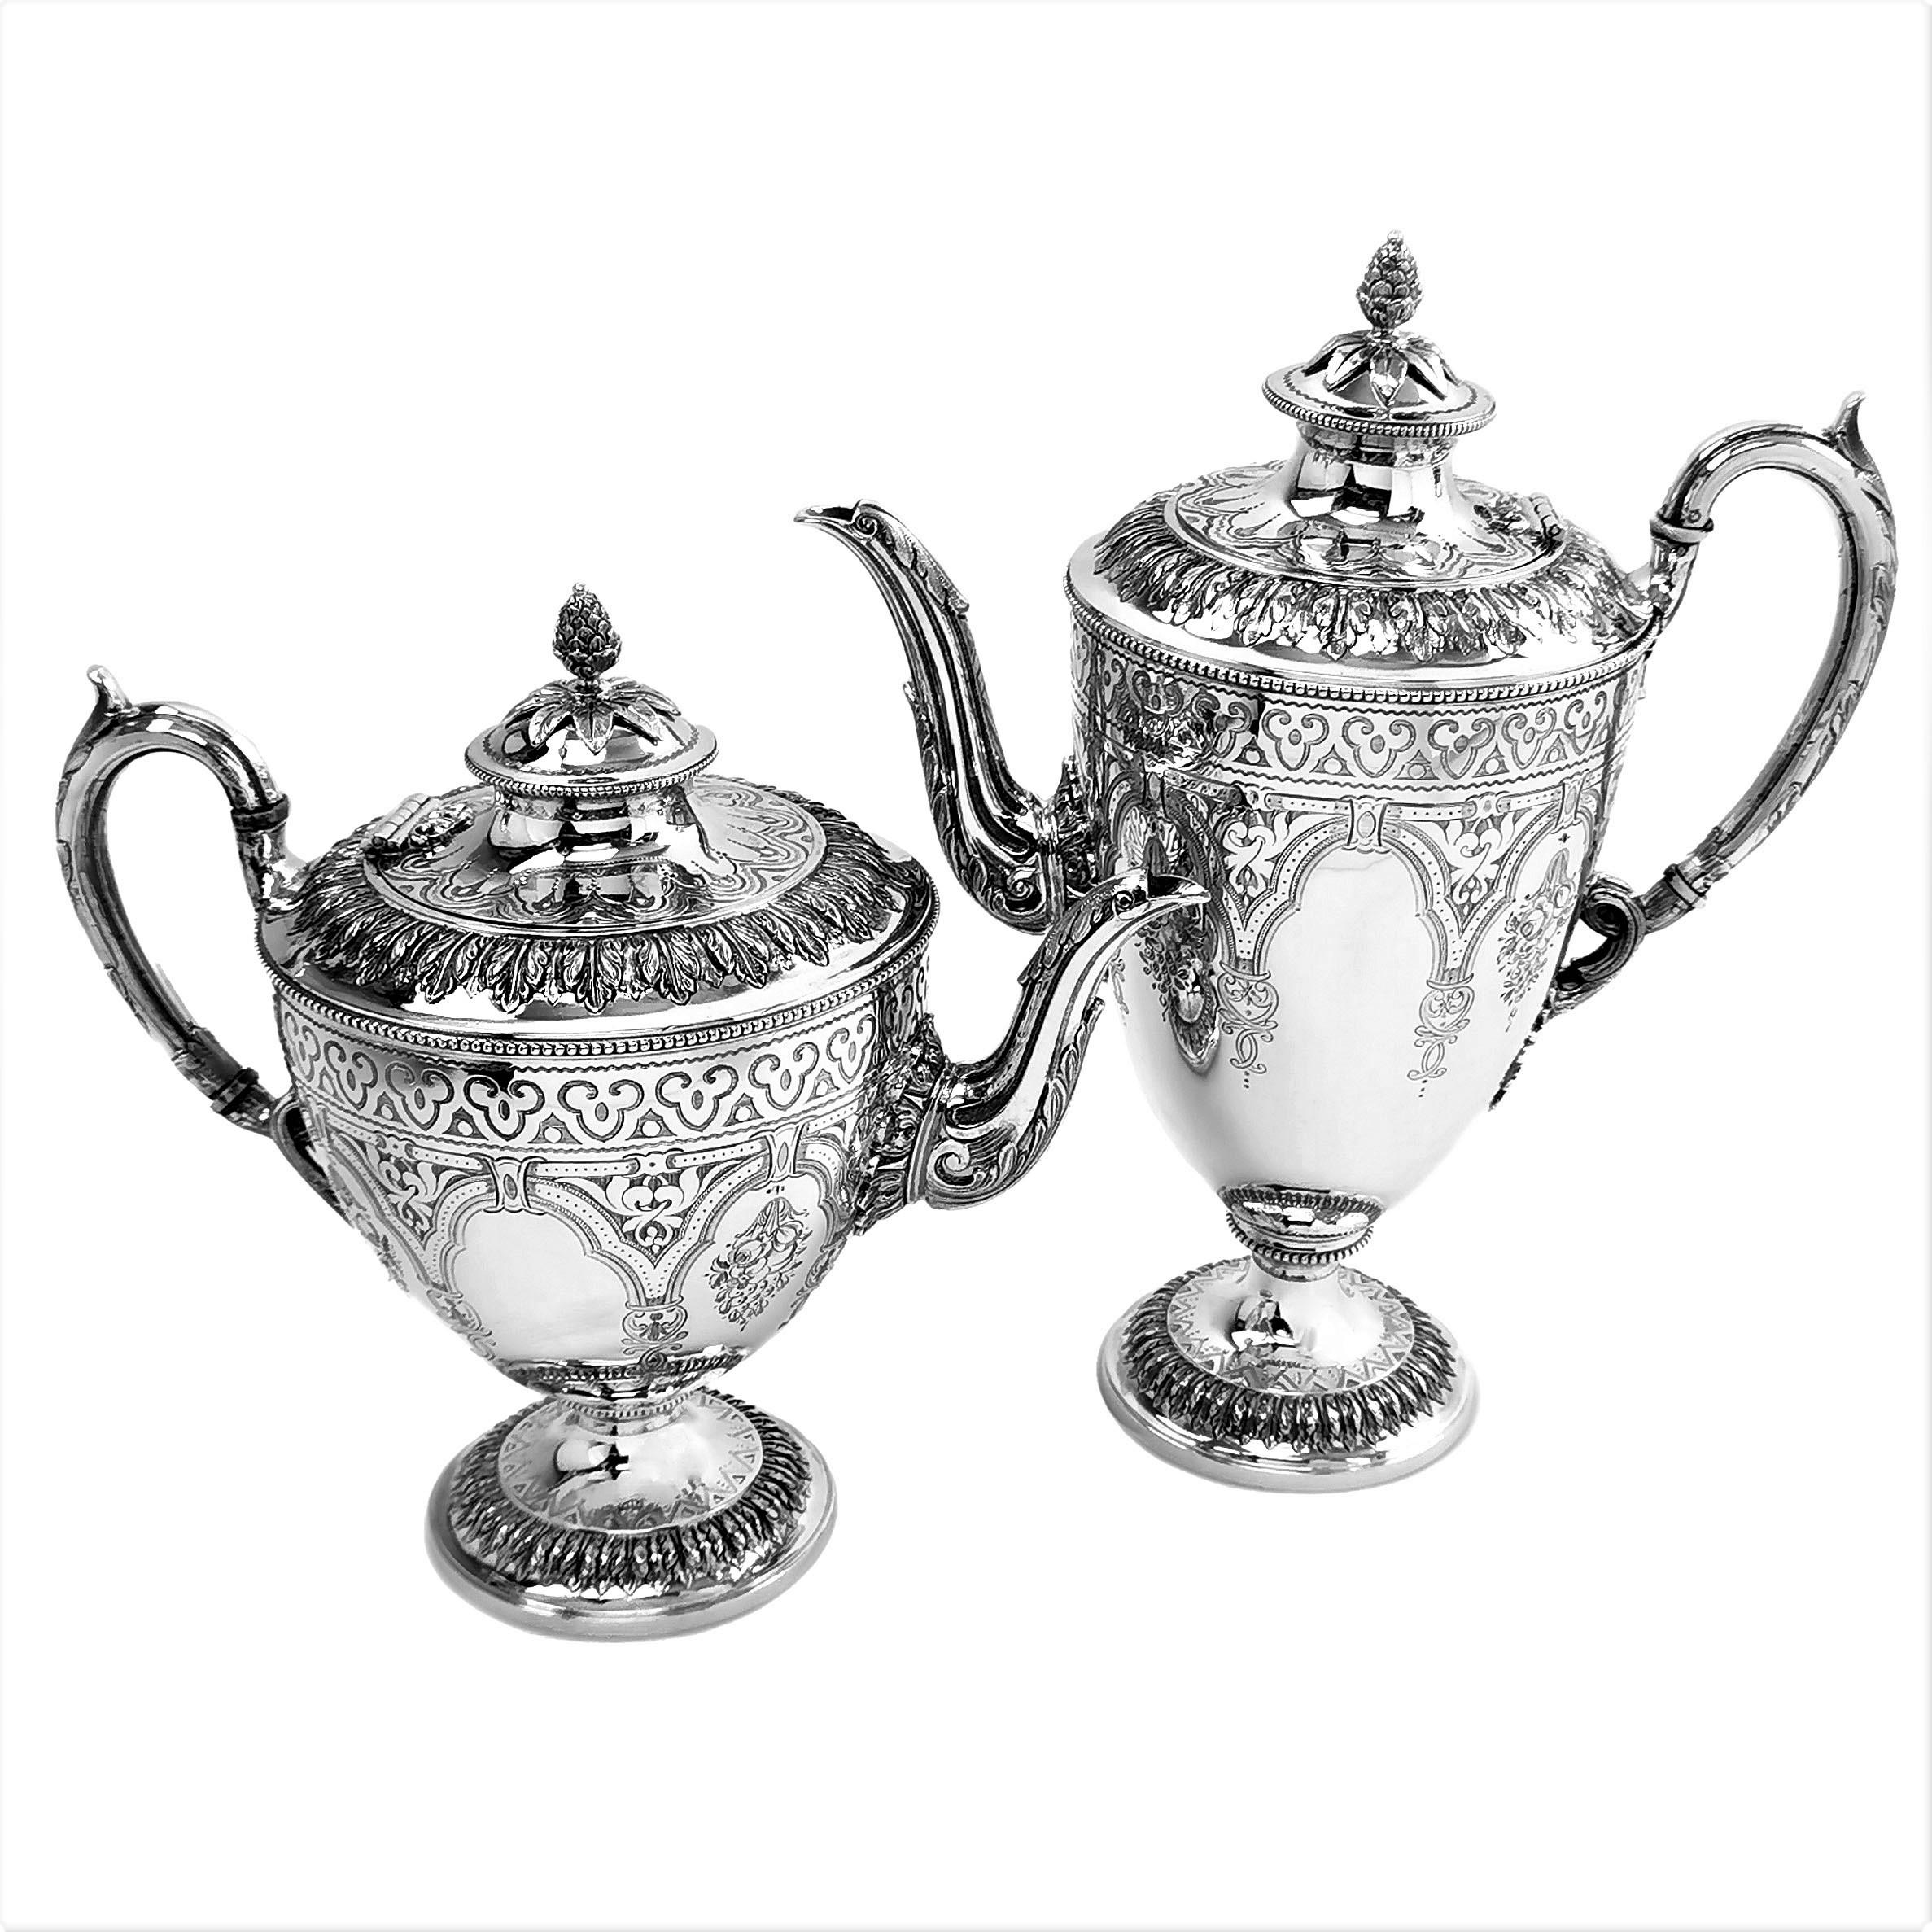 Antique Victorian 5 Piece Silver Tea and Coffee Set with Kettle, 1881 / 82 For Sale 1